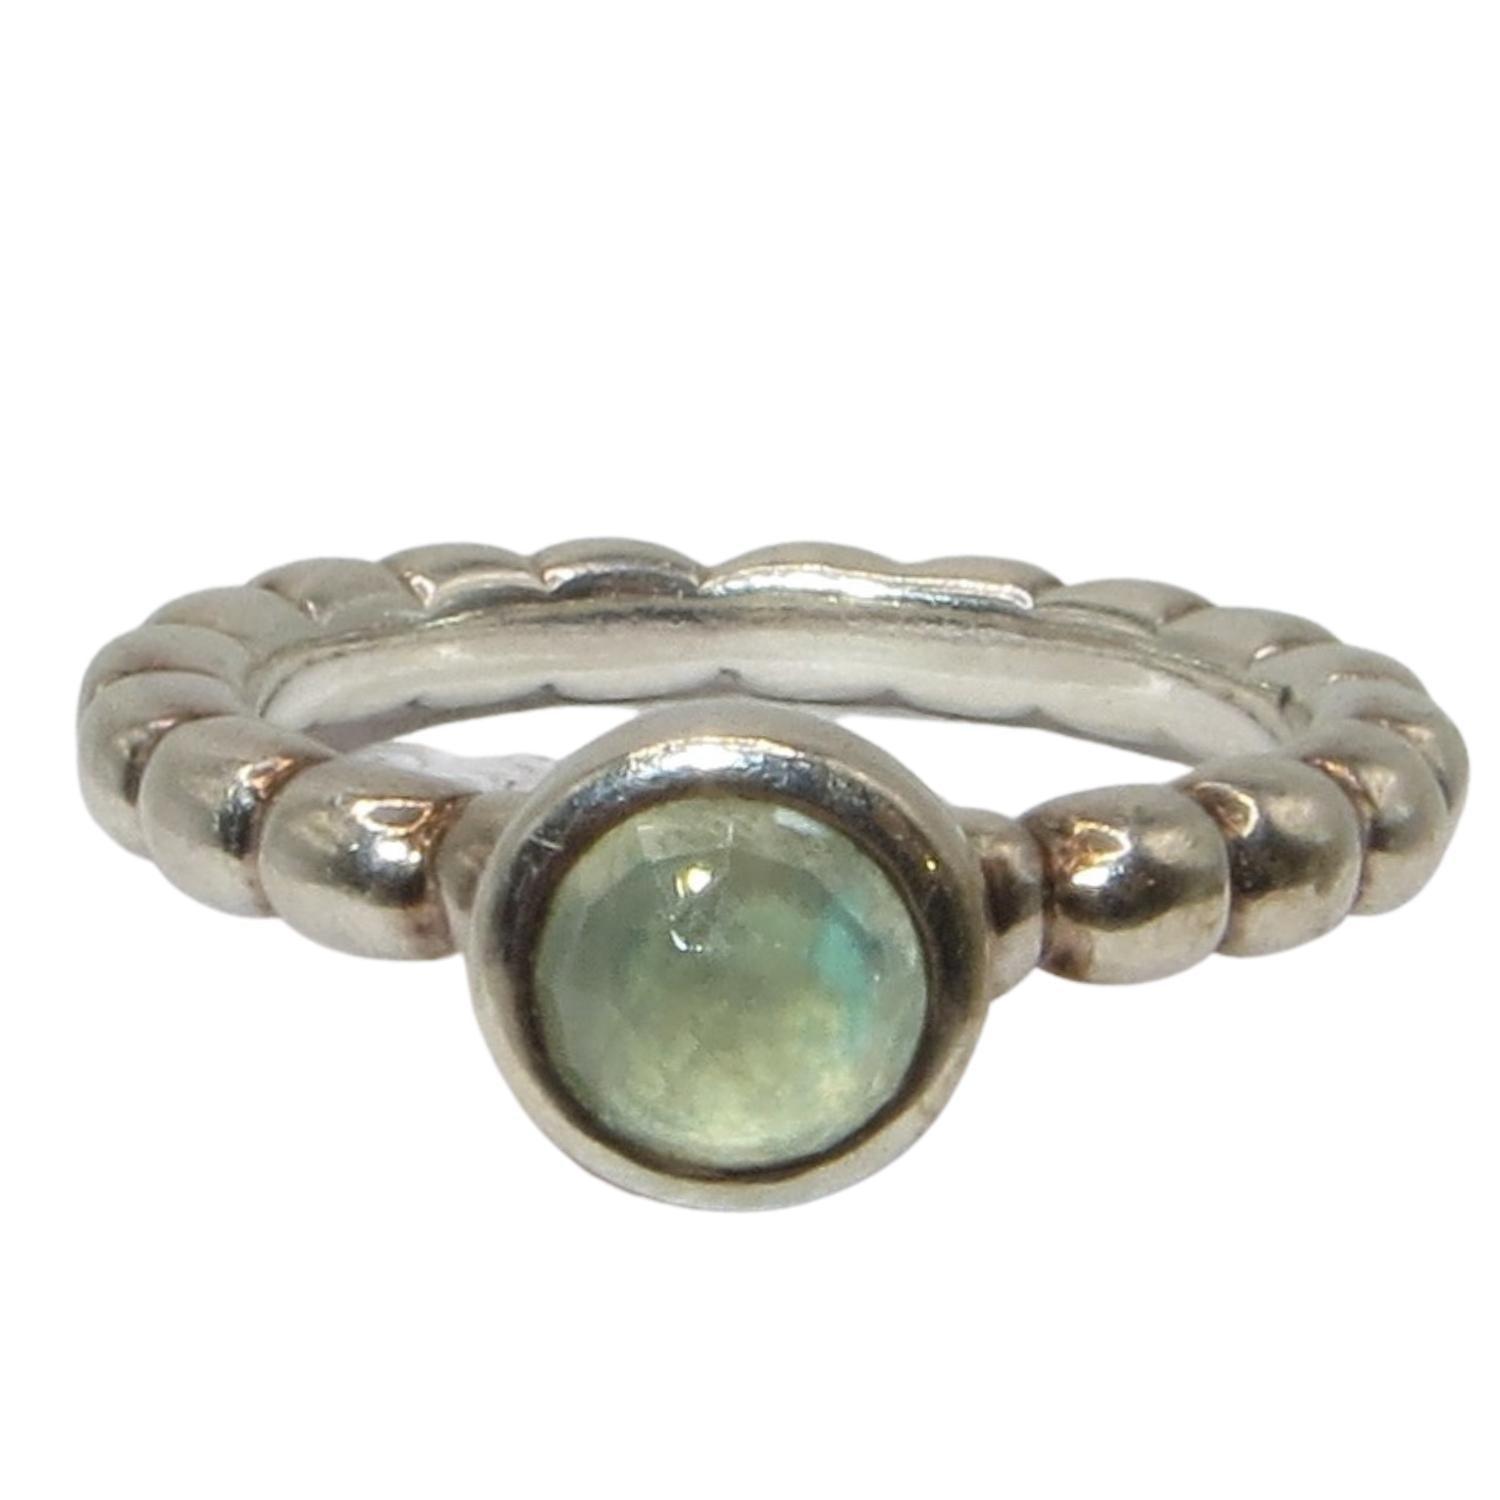 Pandora 190244PR SWEET DREAMS PREHNITE Sterling Silver and Prehnite Ring.  A smooth dome of light green prehnite set in sterling sits atop a thin band.